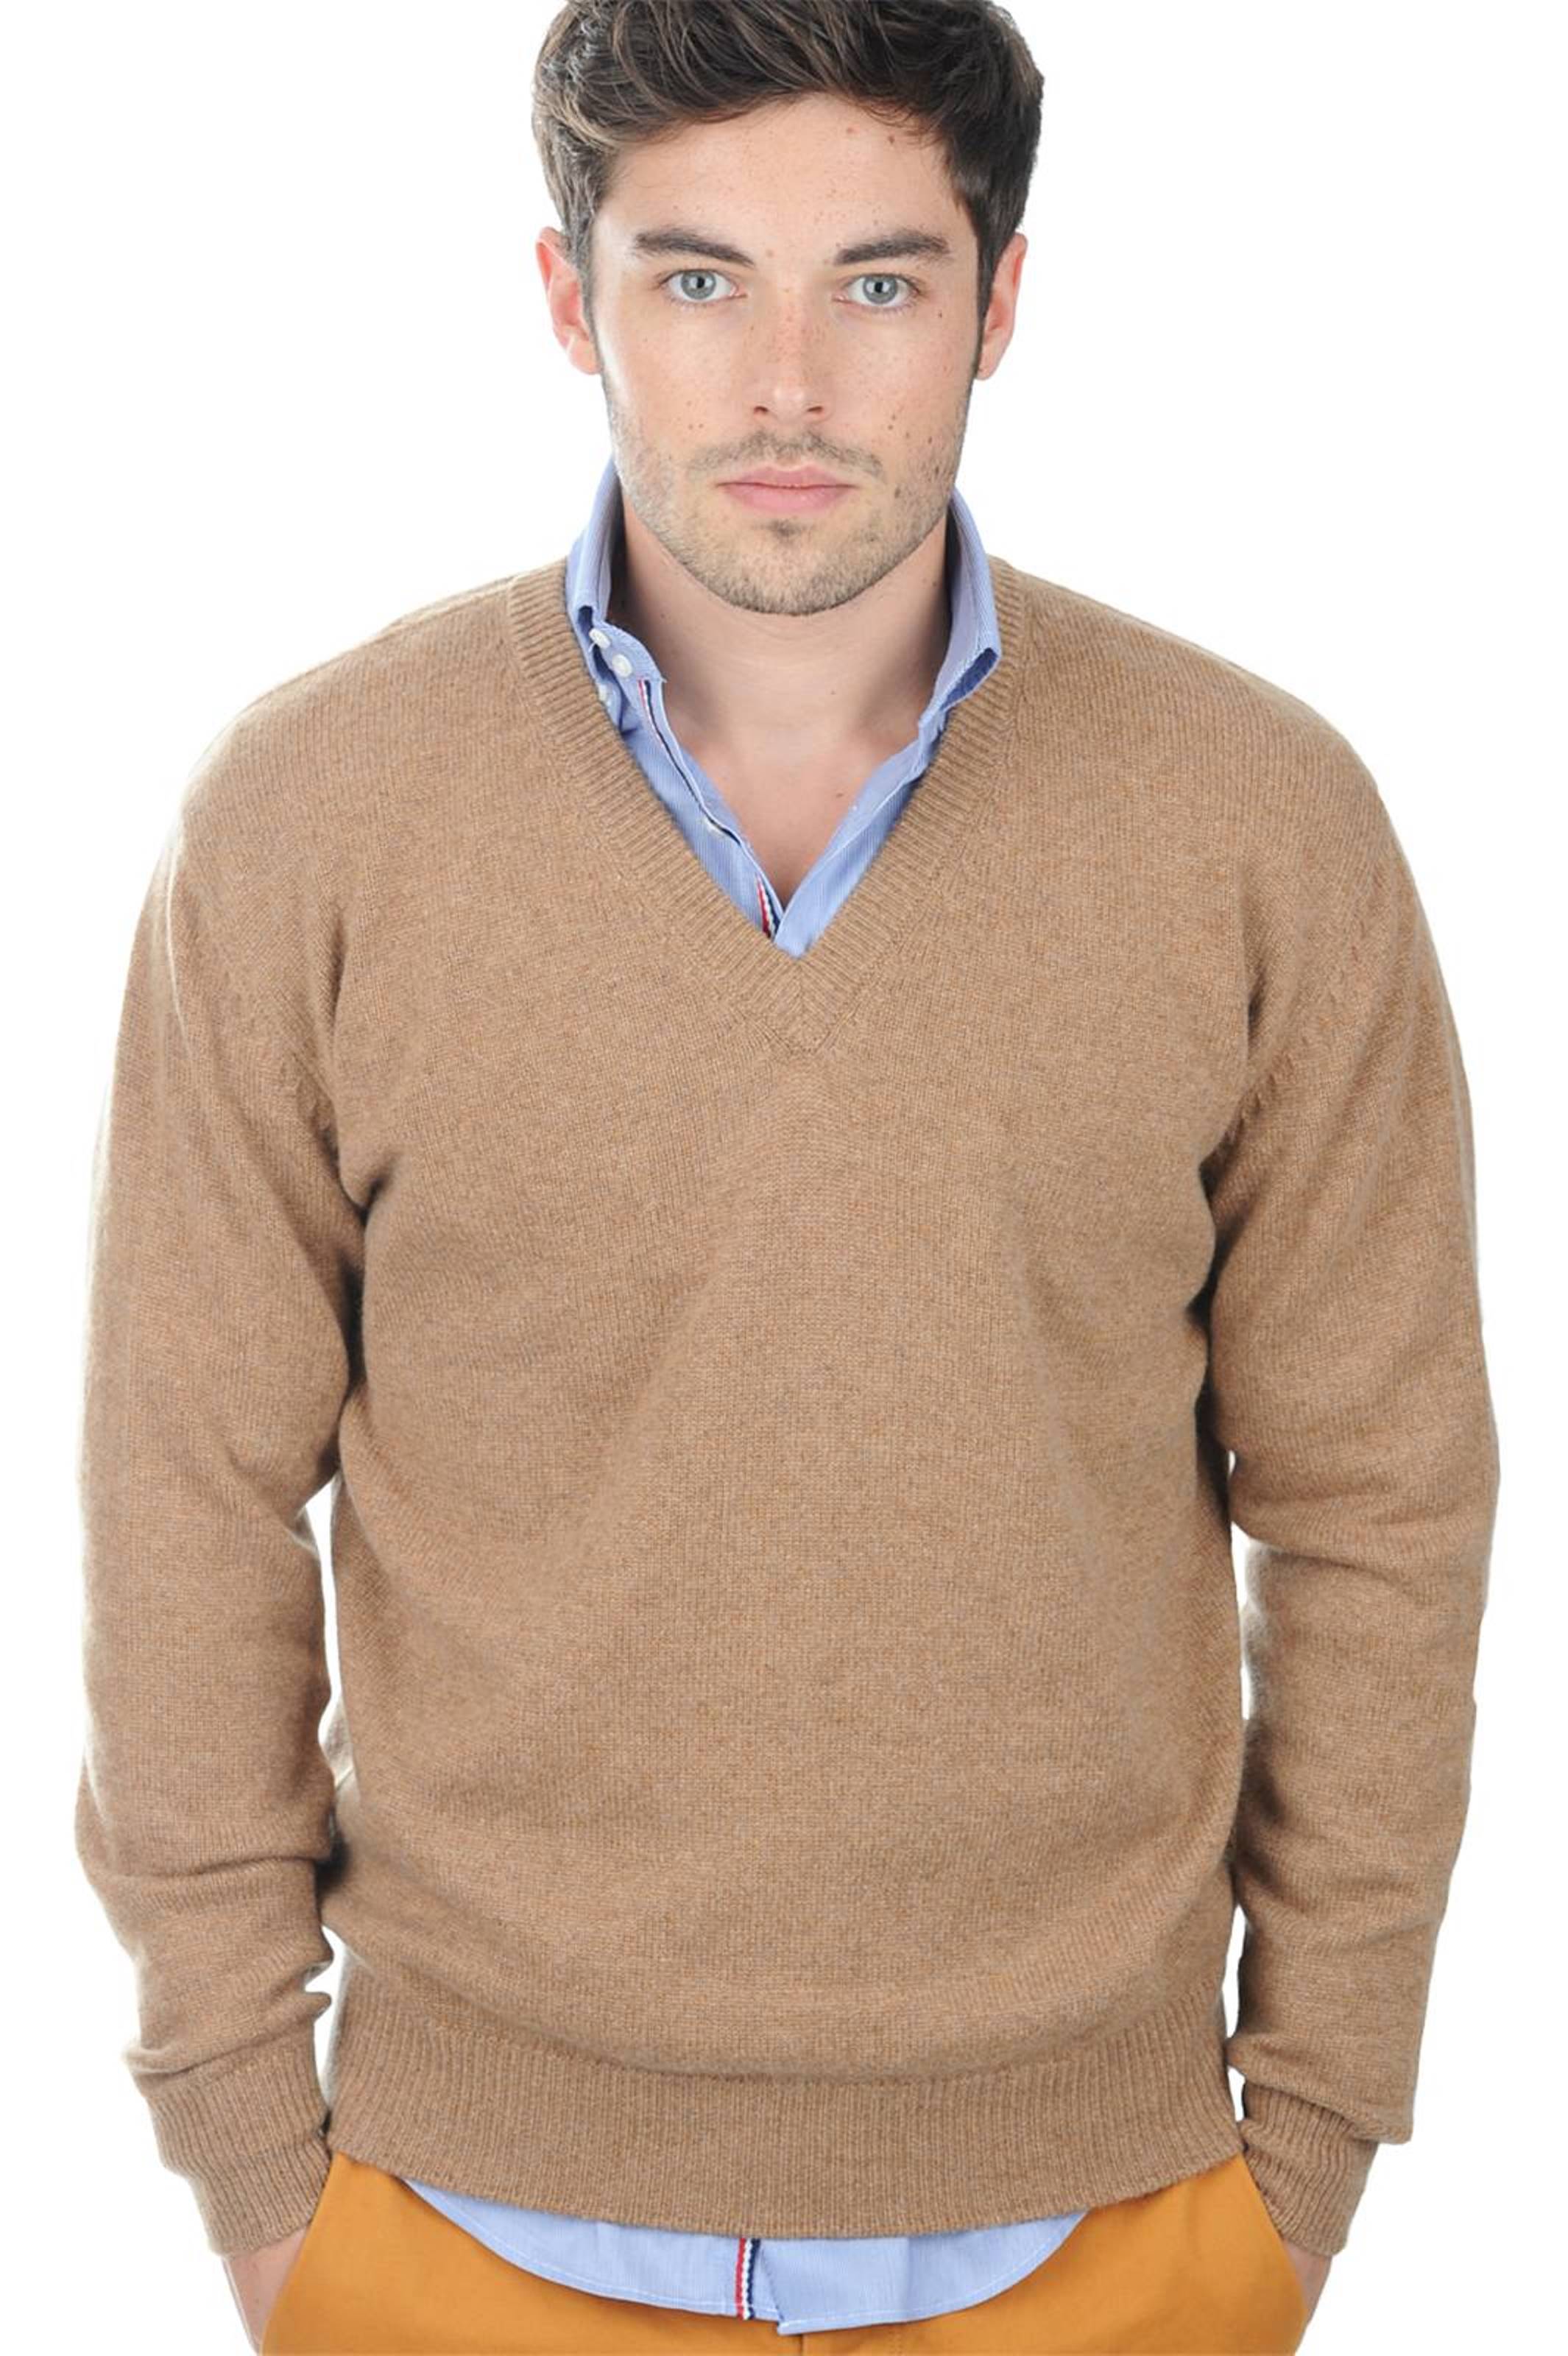 Cachemire pull homme epais hippolyte 4f camel chine s